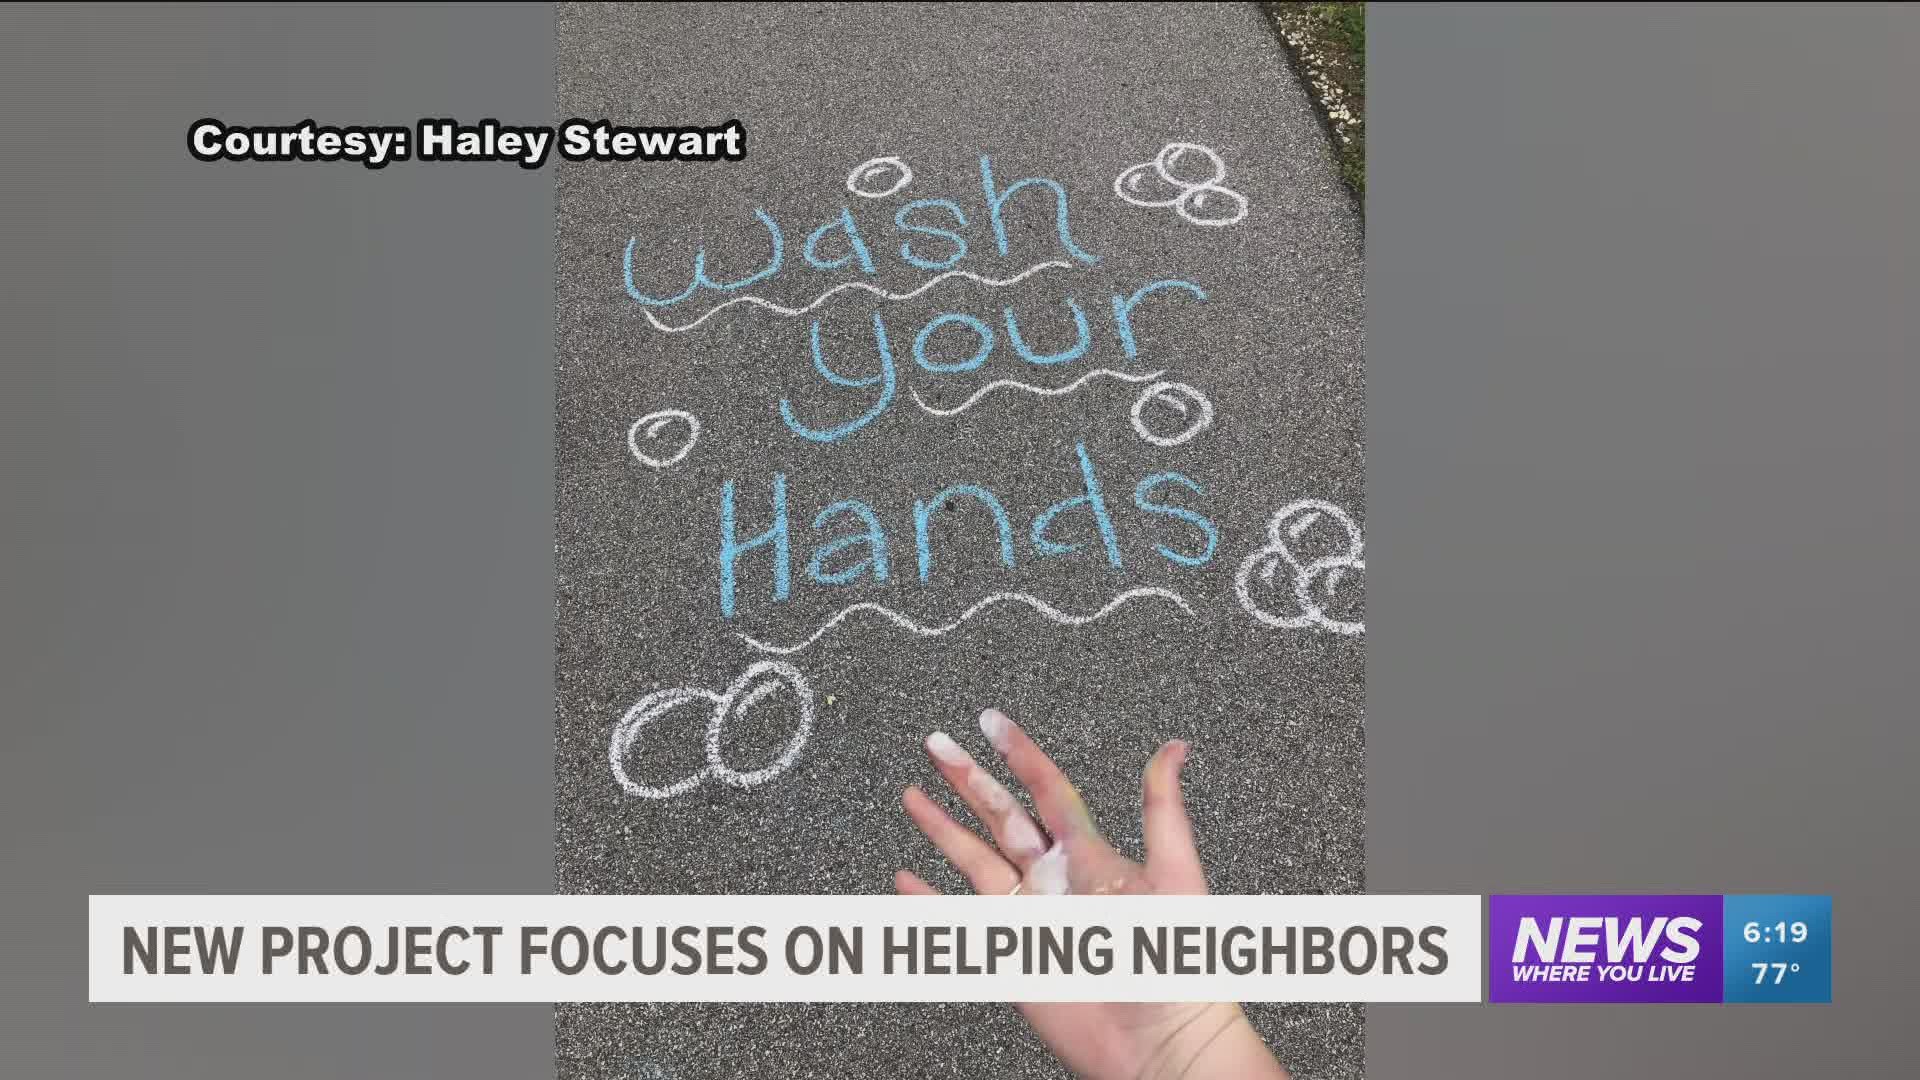 New project focuses on helping neighbors